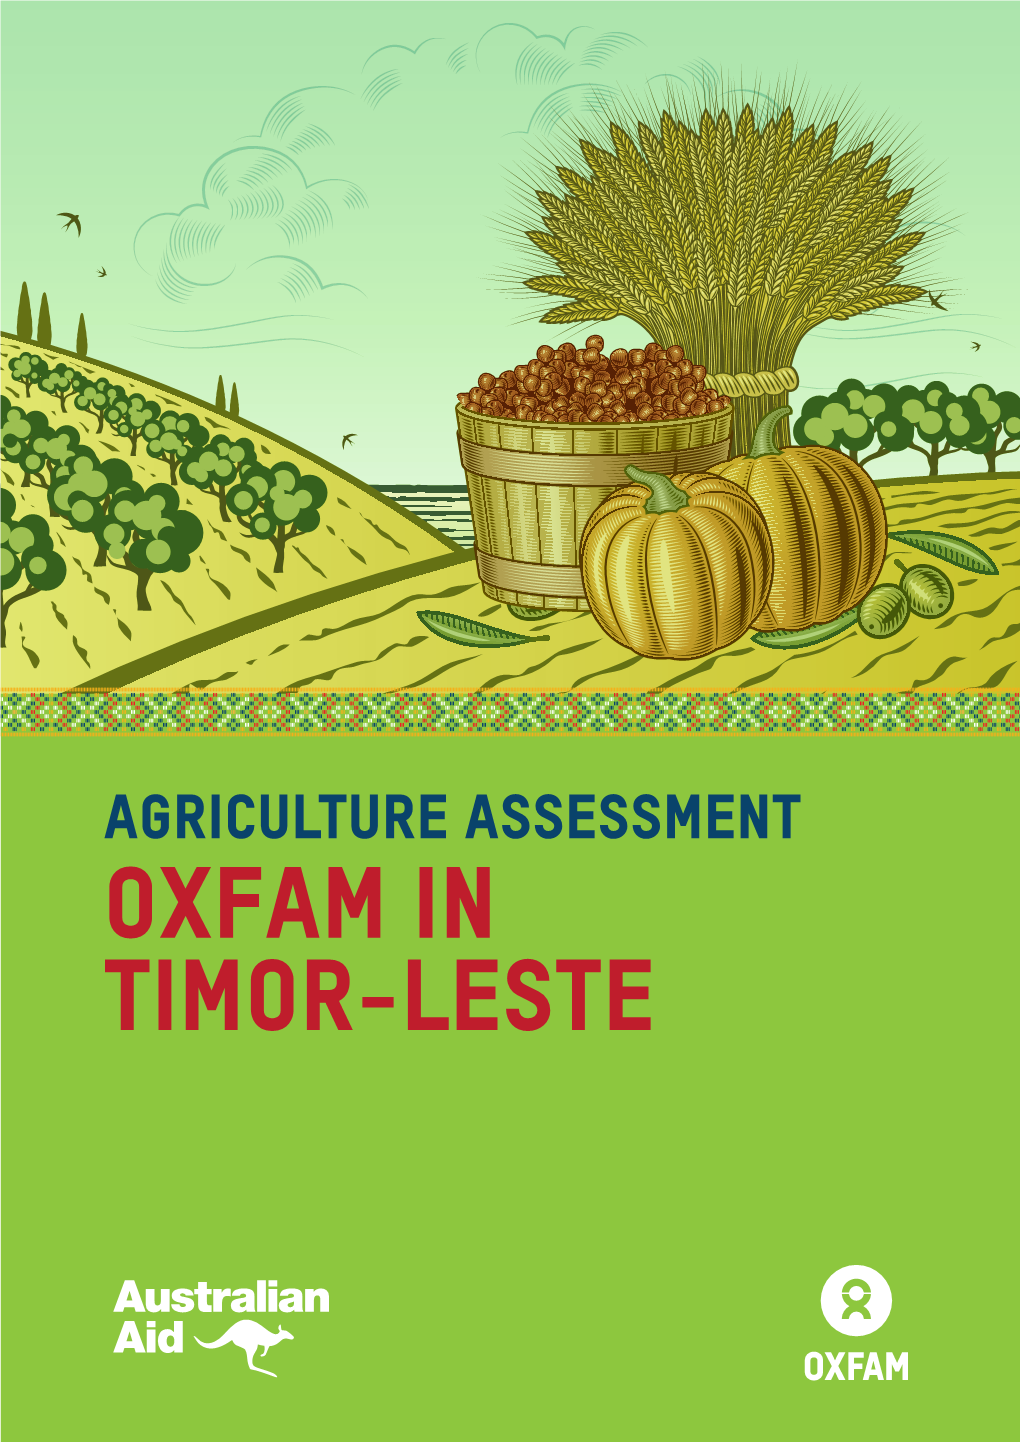 Agriculture Assessment Oxfam in Timor-Leste